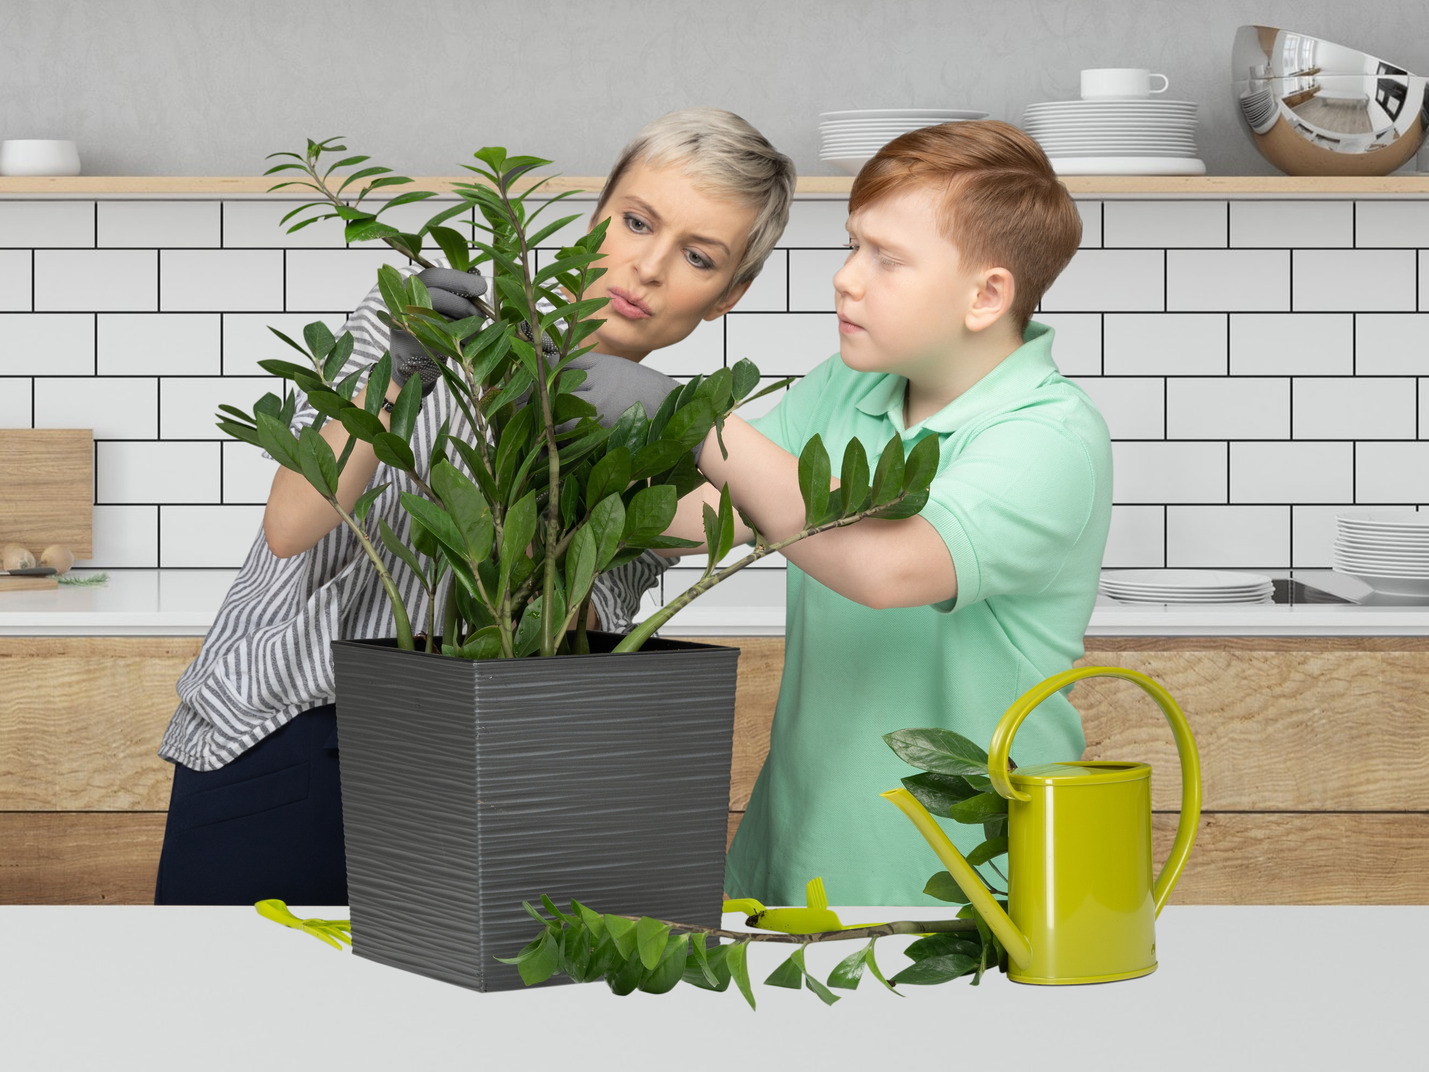 Pregnant woman watering plants in the kitchen